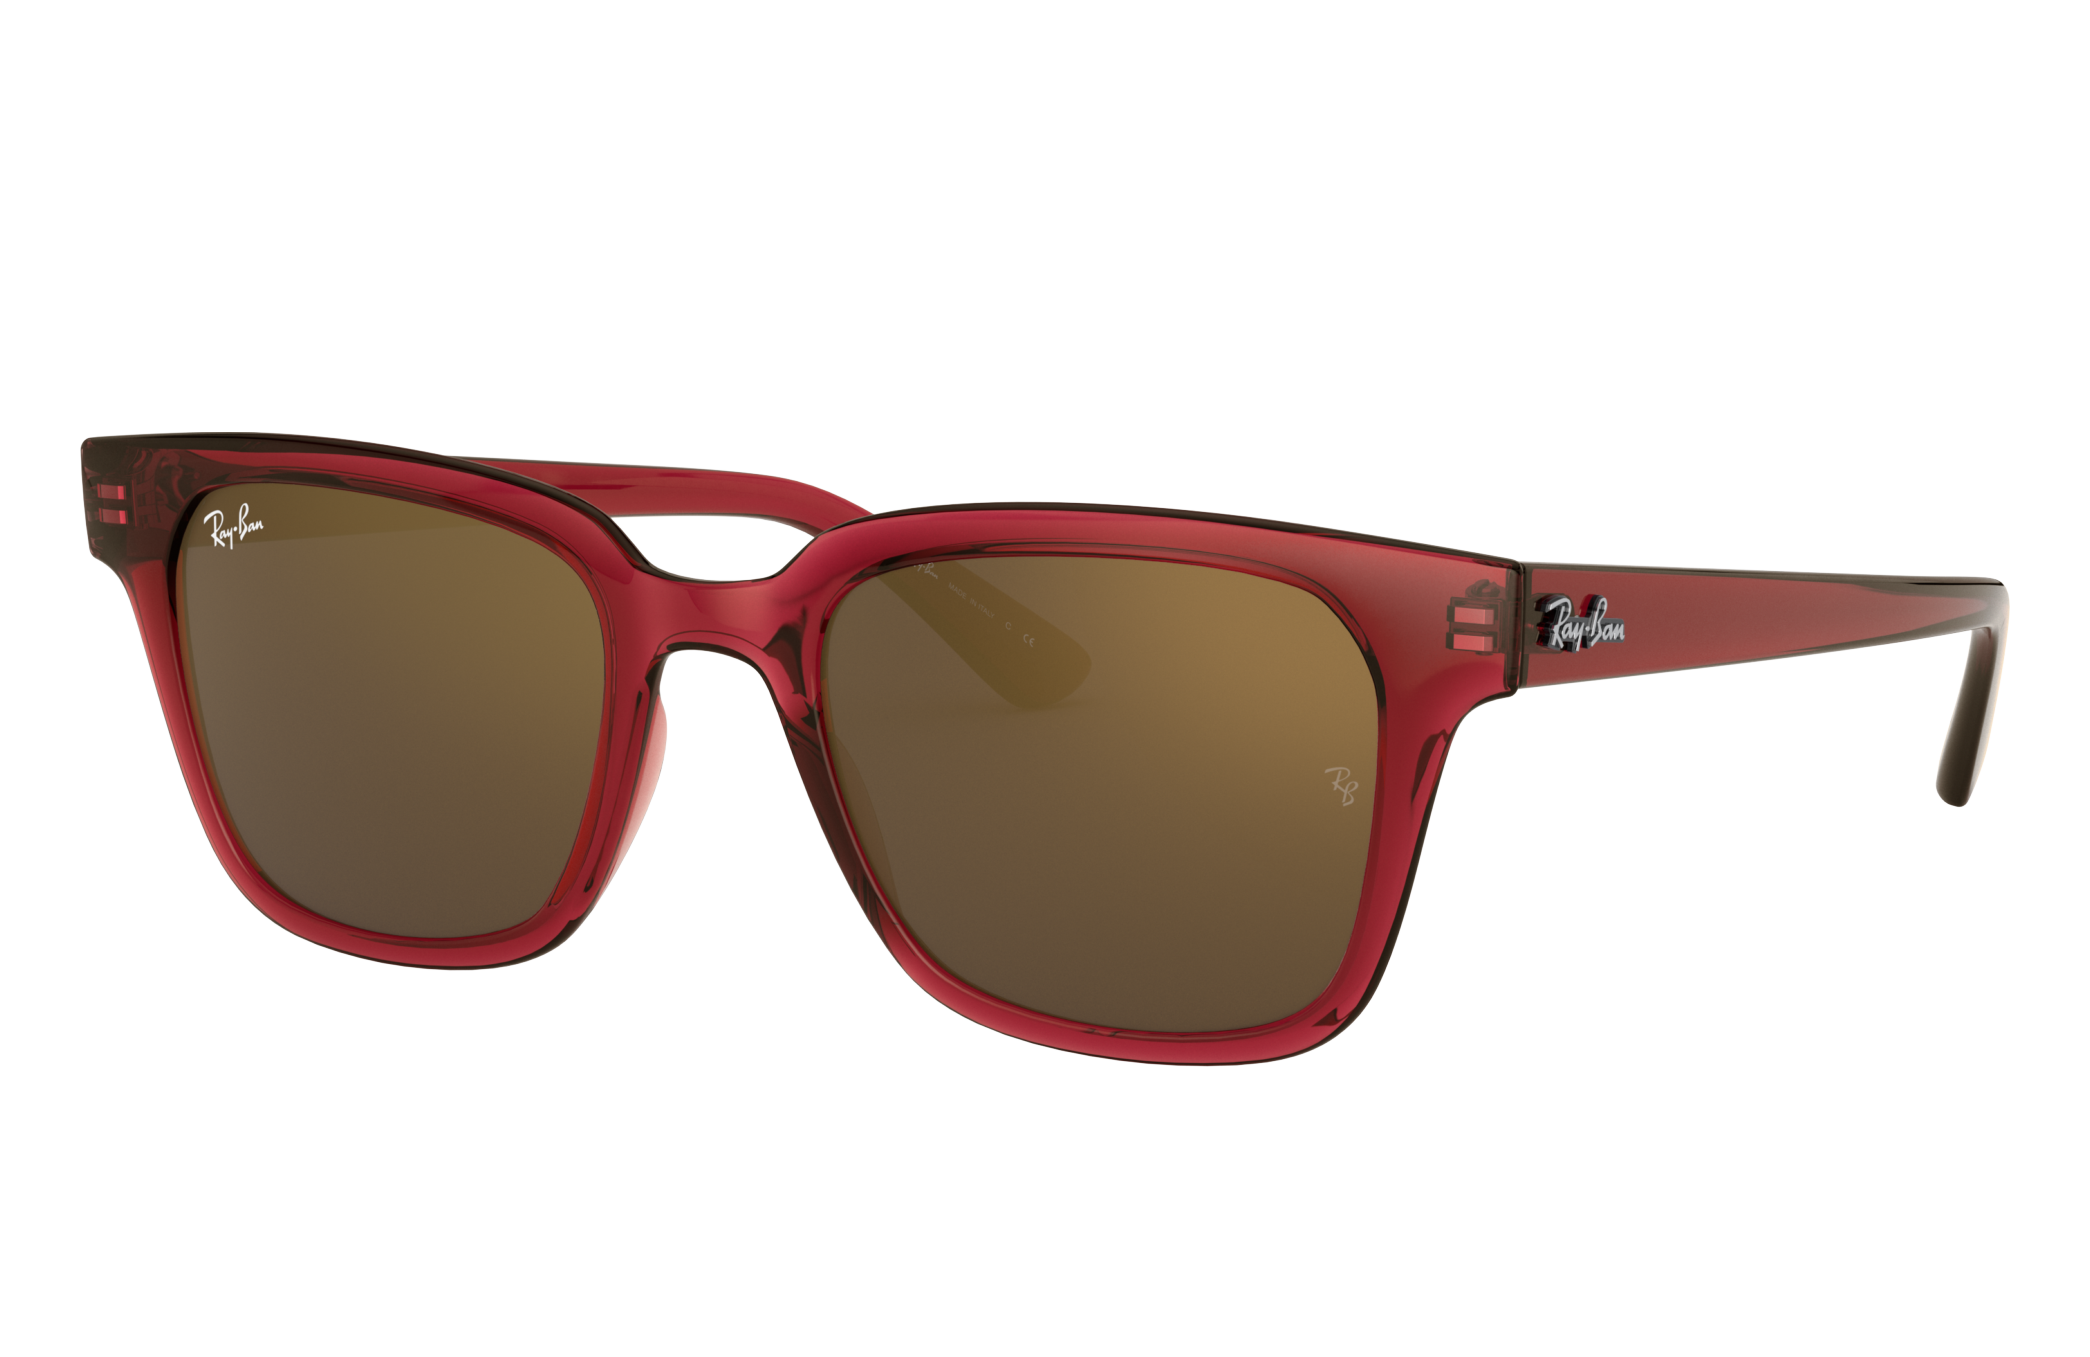 Rb4323 Sunglasses in Transparent Red and Light Brown | Ray-Ban®